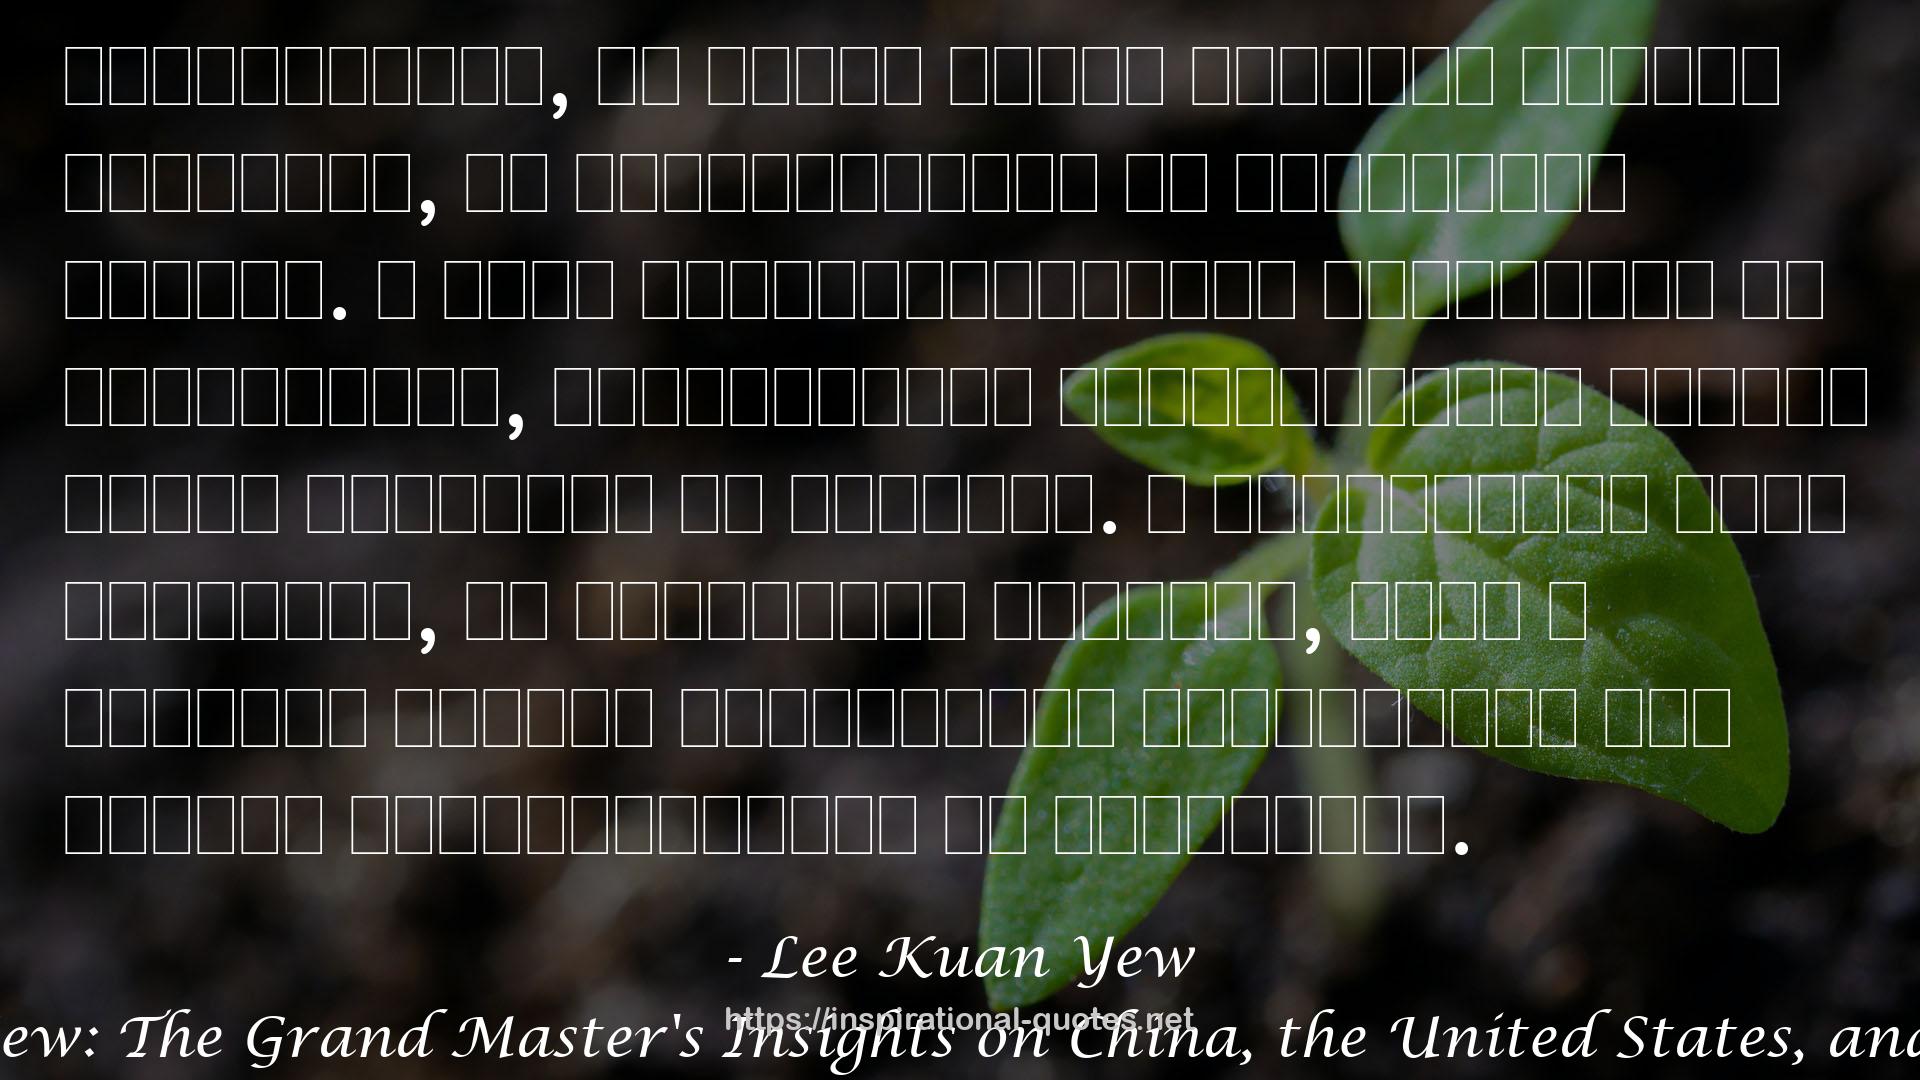 Lee Kuan Yew: The Grand Master's Insights on China, the United States, and the World QUOTES